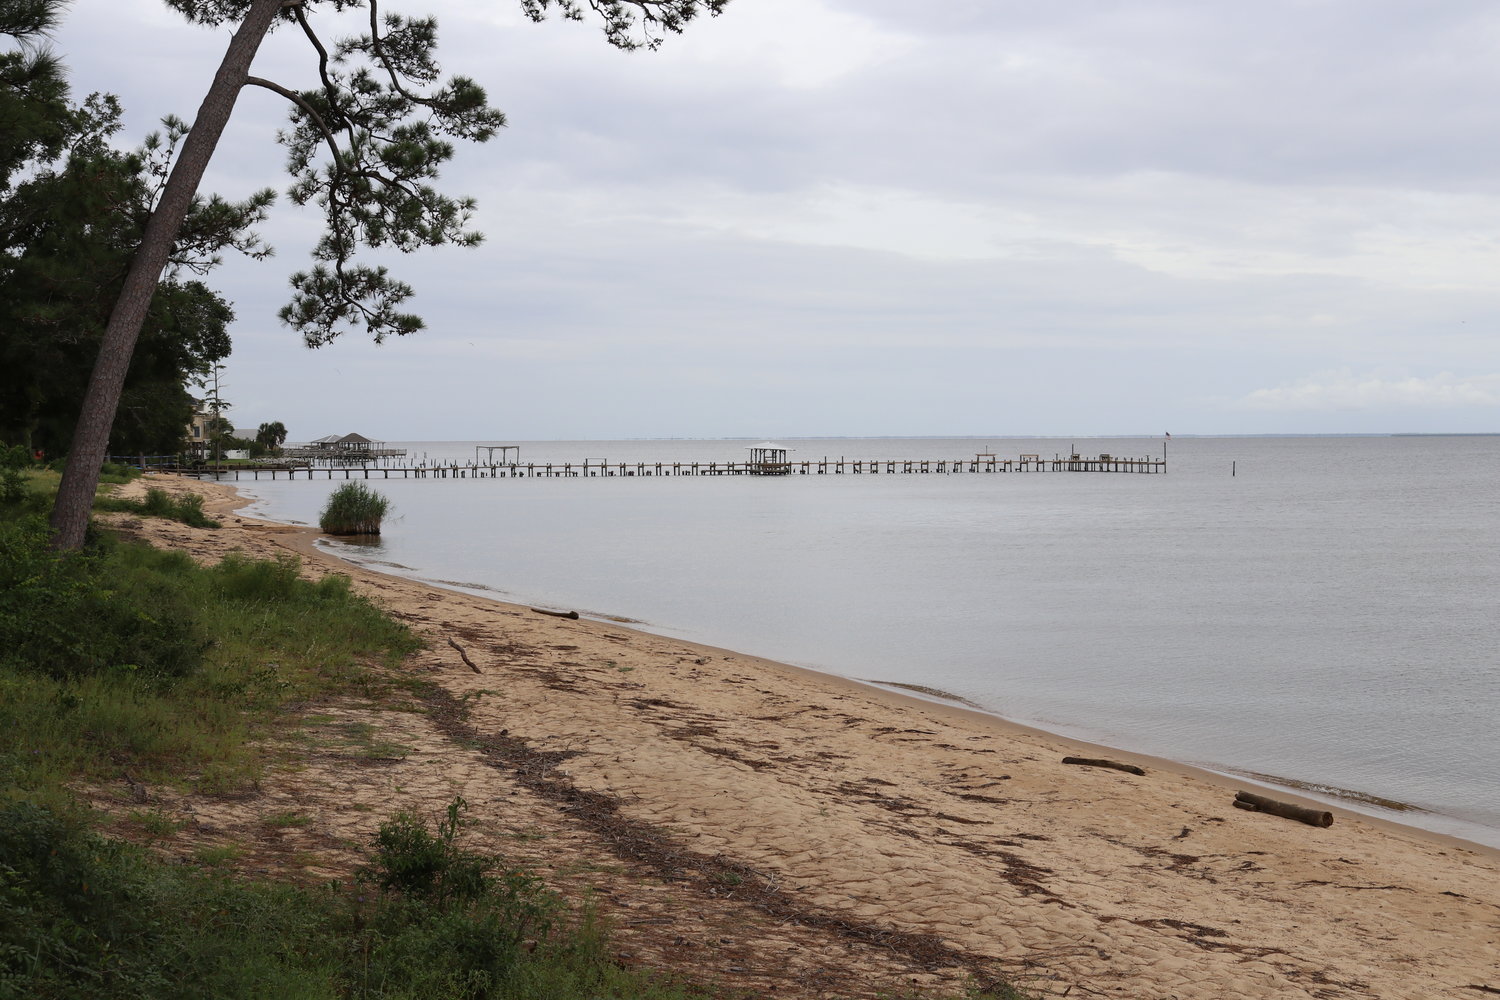 Rivers flowing into the Mobile-Tensaw delta brings water from throughout Alabama into Mobile Bay. The group Clean Water Alabama is working to improve the water quality of Mobile Bay and other local waters.